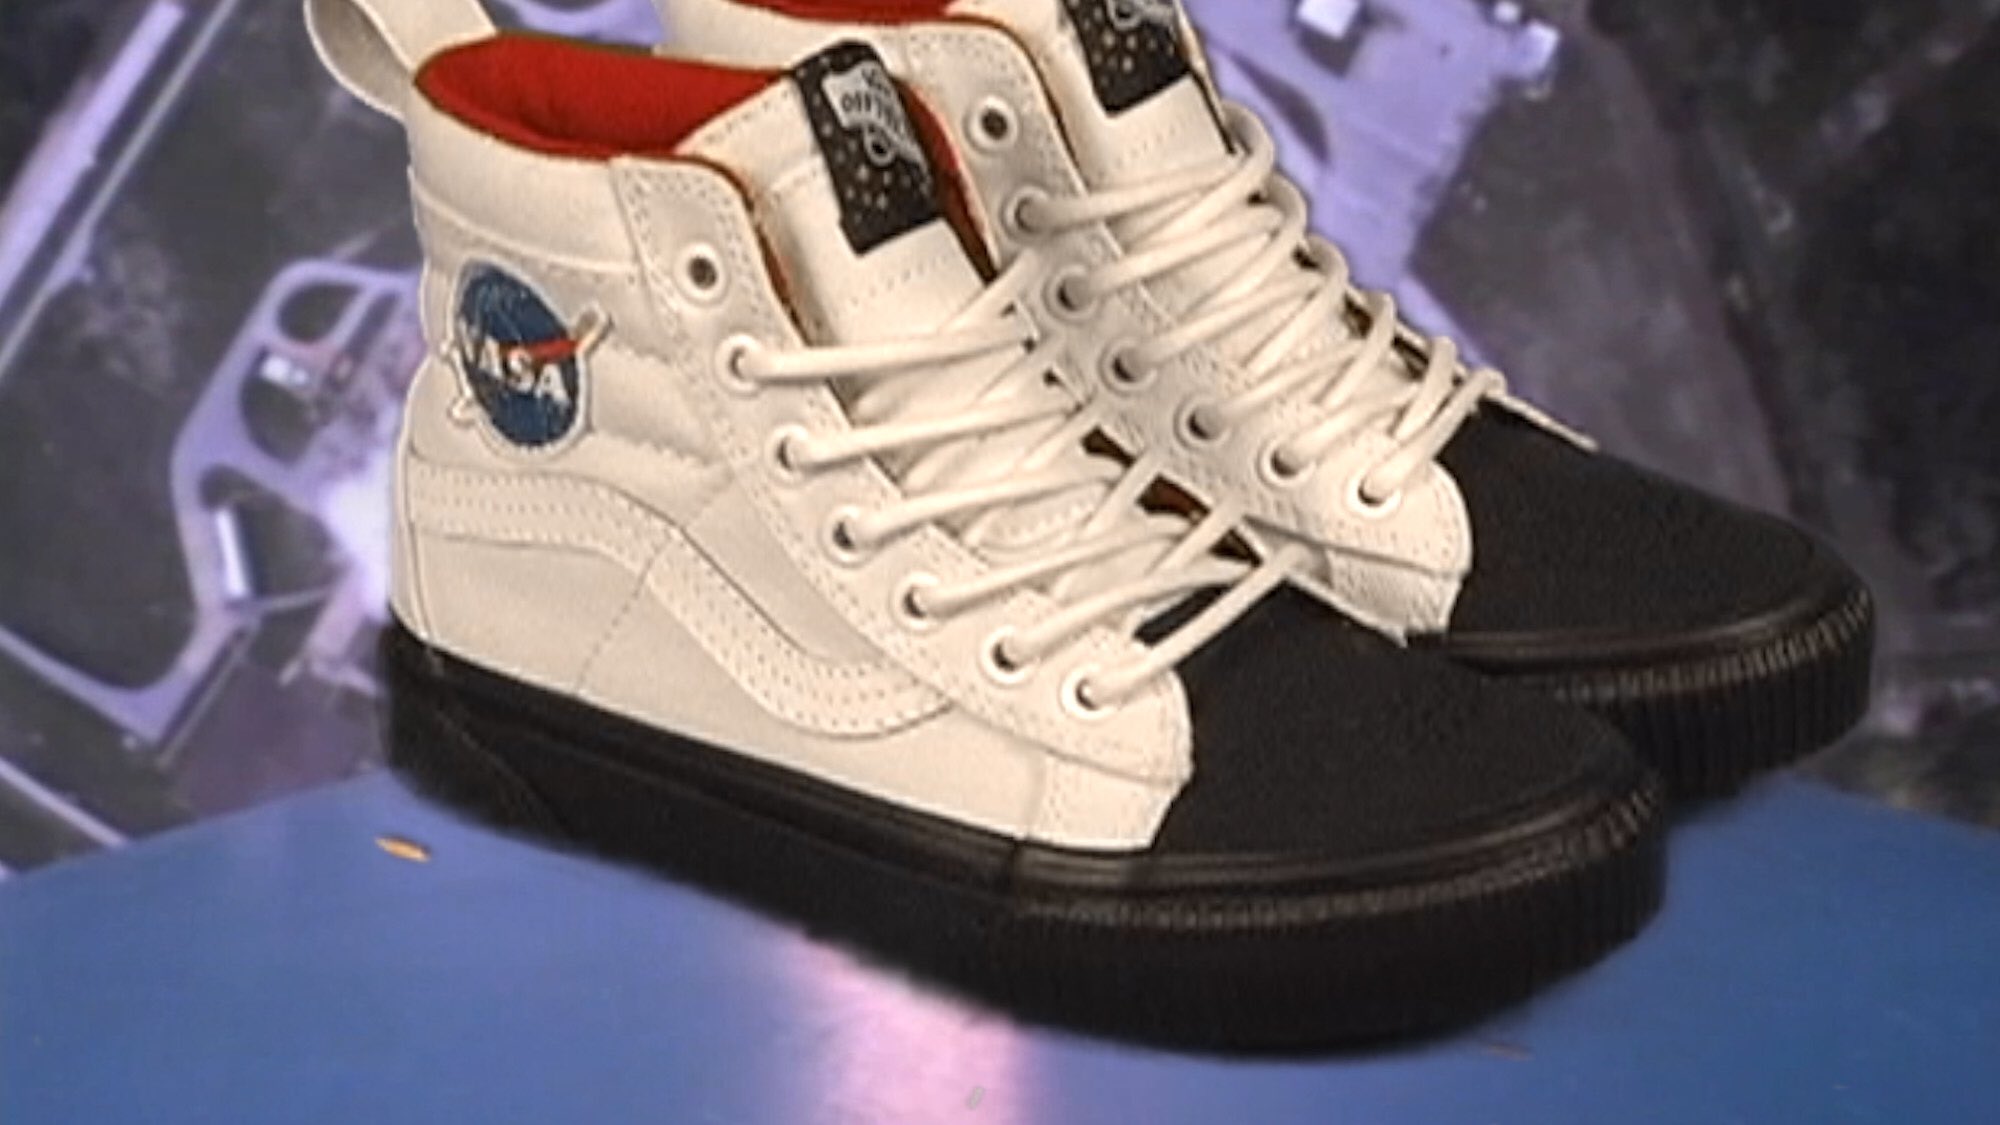 Vans on Twitter: "3..2..1.. BLAST OFF! The Vans Space Voyager collection is  now available at https://t.co/GGXYdxGJsD and select stores. @NASA  https://t.co/EK0ixUQmUI" / Twitter